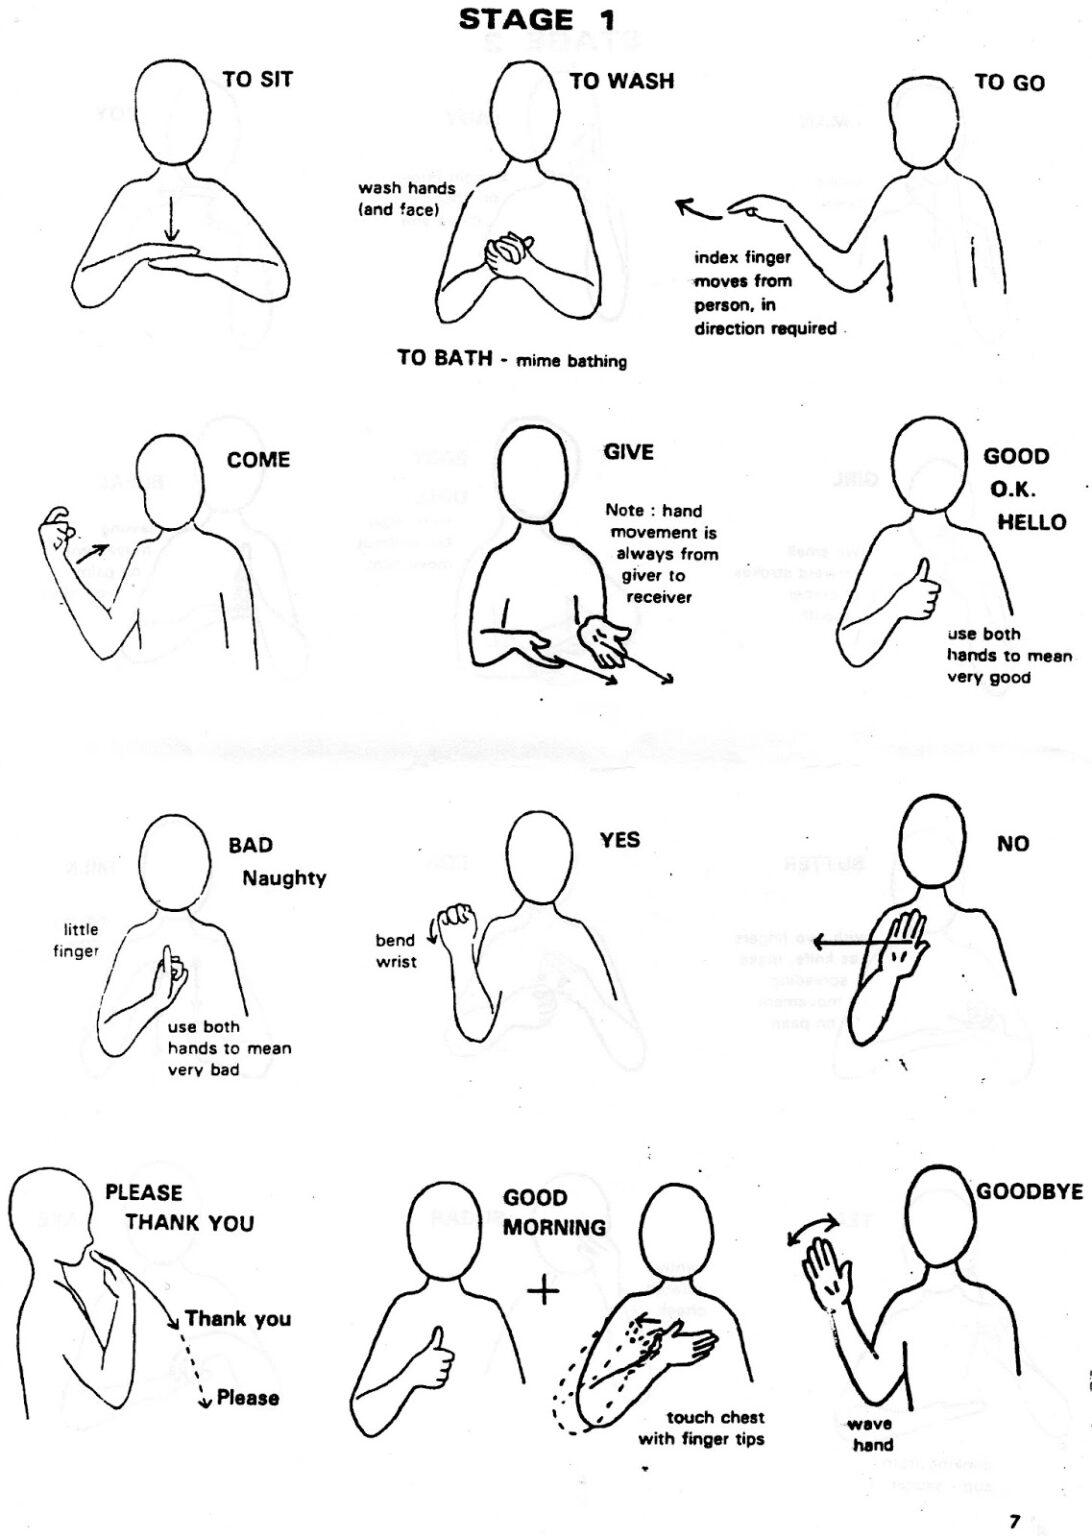 making-s-p-a-c-e-for-everyone-makaton-sign-of-the-week-st-thomas-of